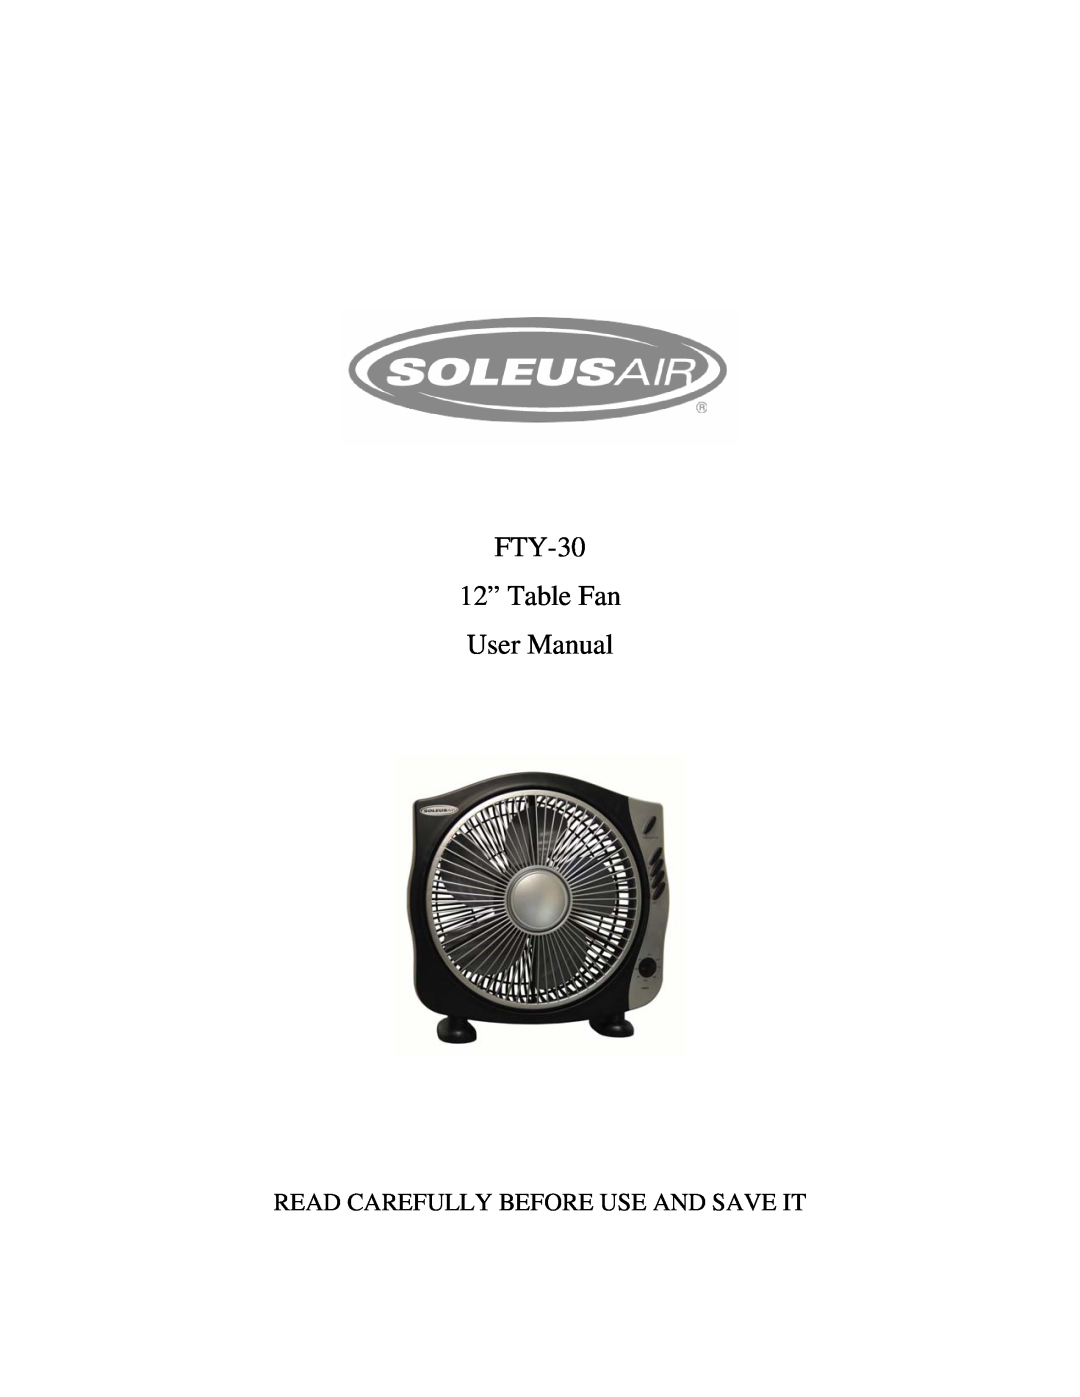 Soleus Air FTY-30 user manual Read Carefully Before Use And Save It 